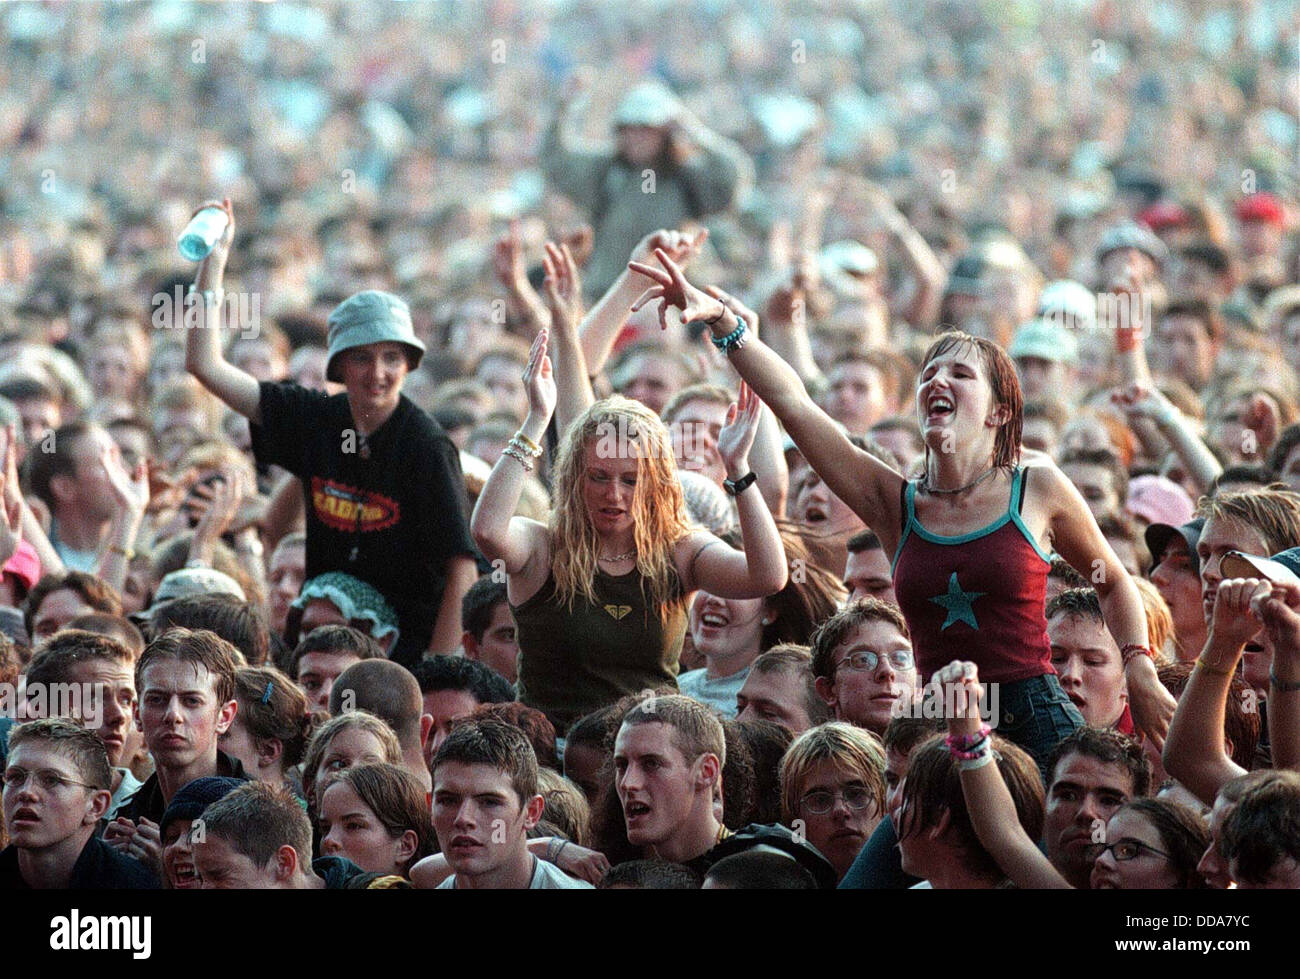 READING FESTIVAL...PIC SHOWS THE CROWD AT THIS YEARS READING FESTIVAL WHERE AN ESTIMATED 100,000 MUSIC FANS ATTENDED. Stock Photo